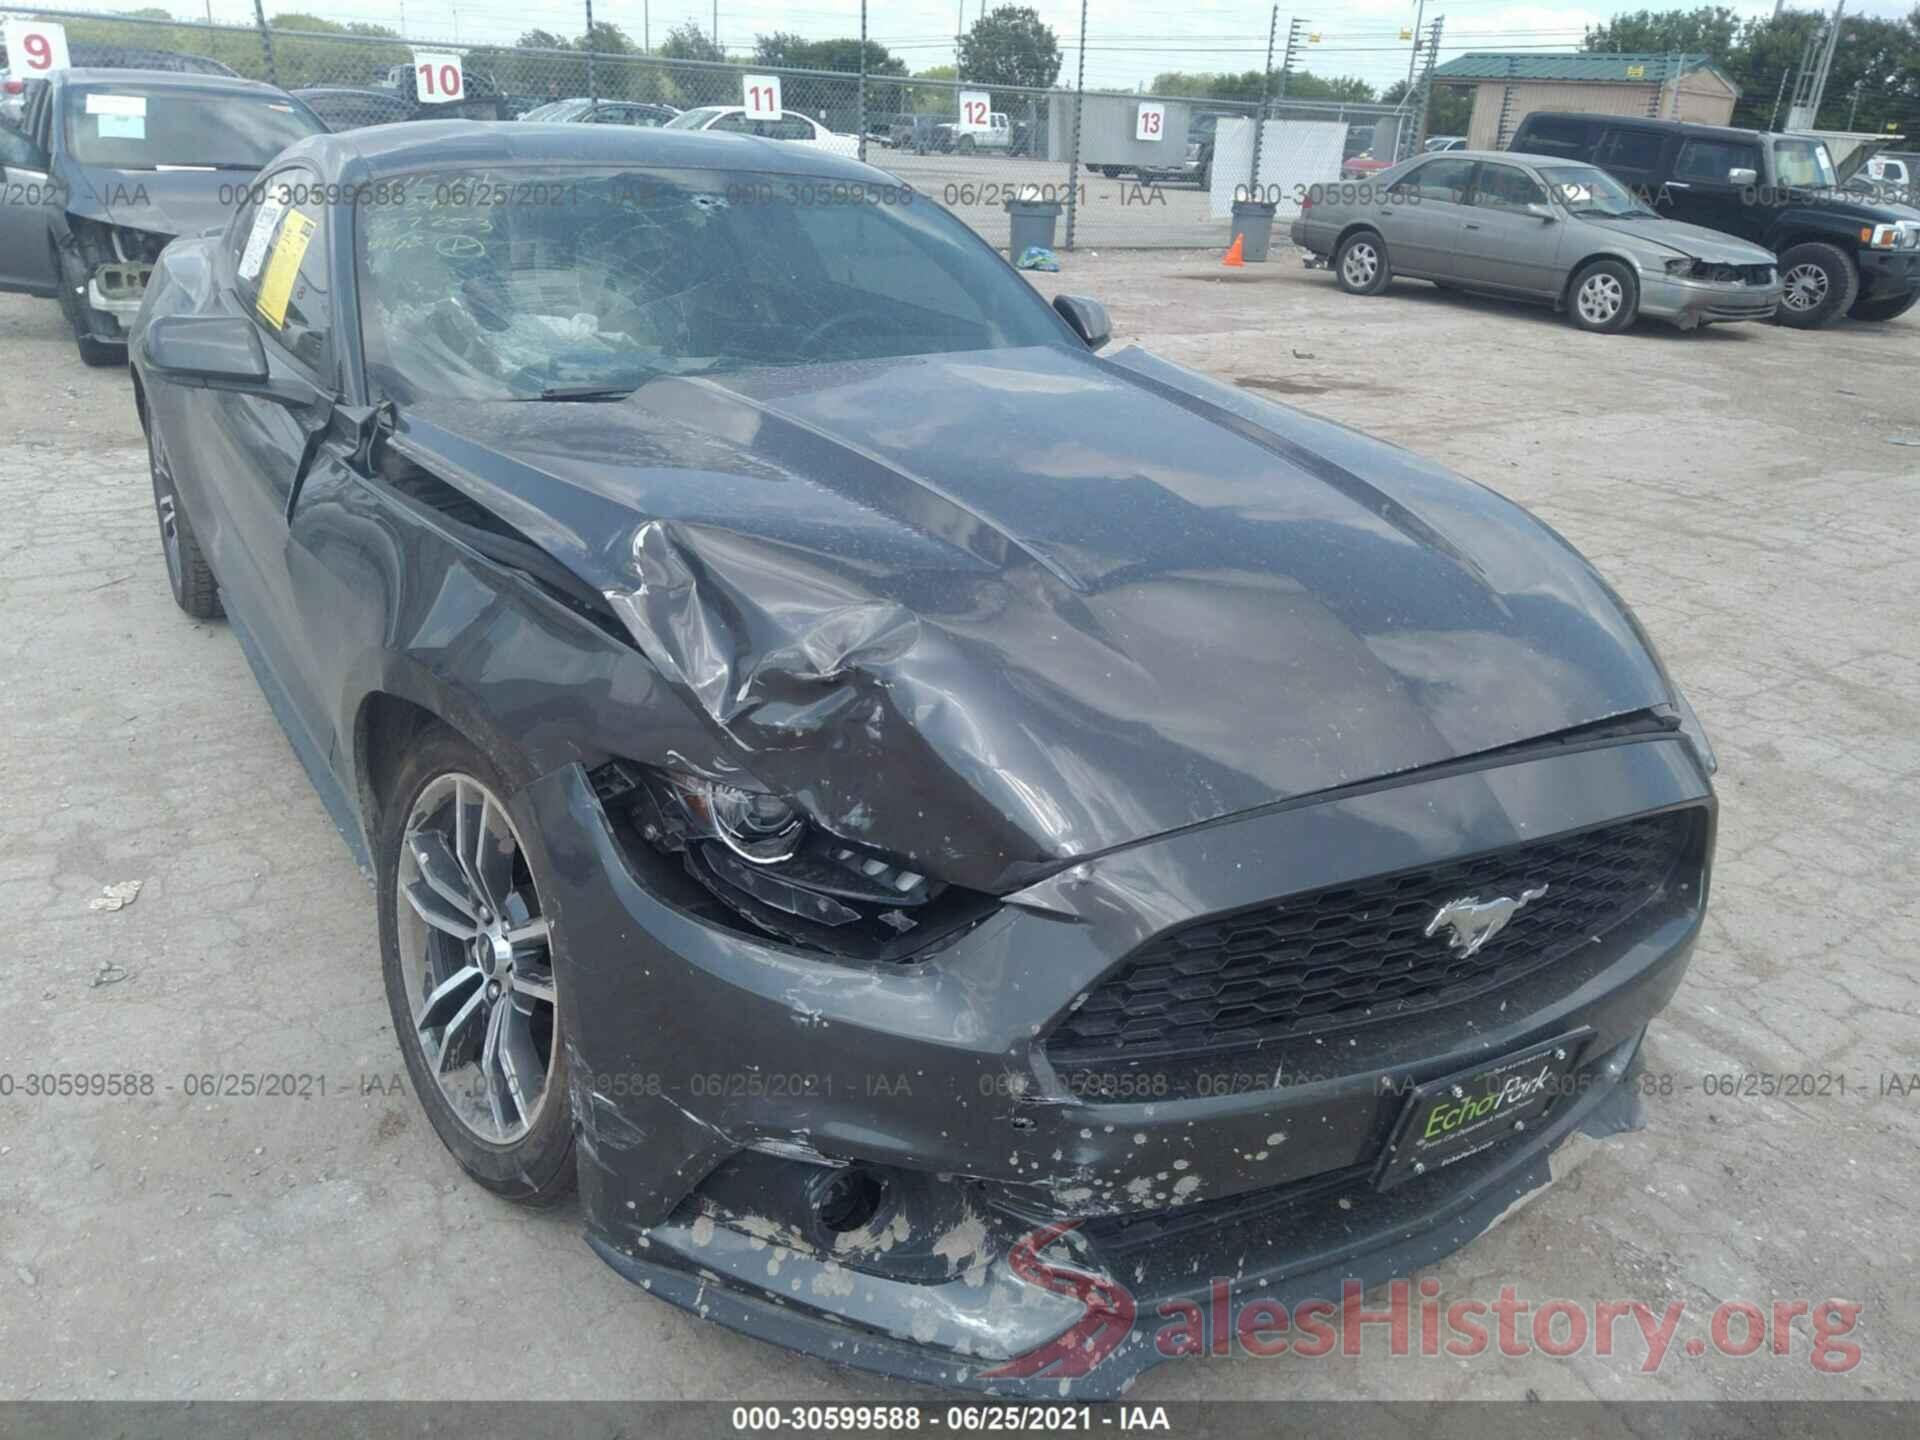 1FA6P8TH3H5307253 2017 FORD MUSTANG